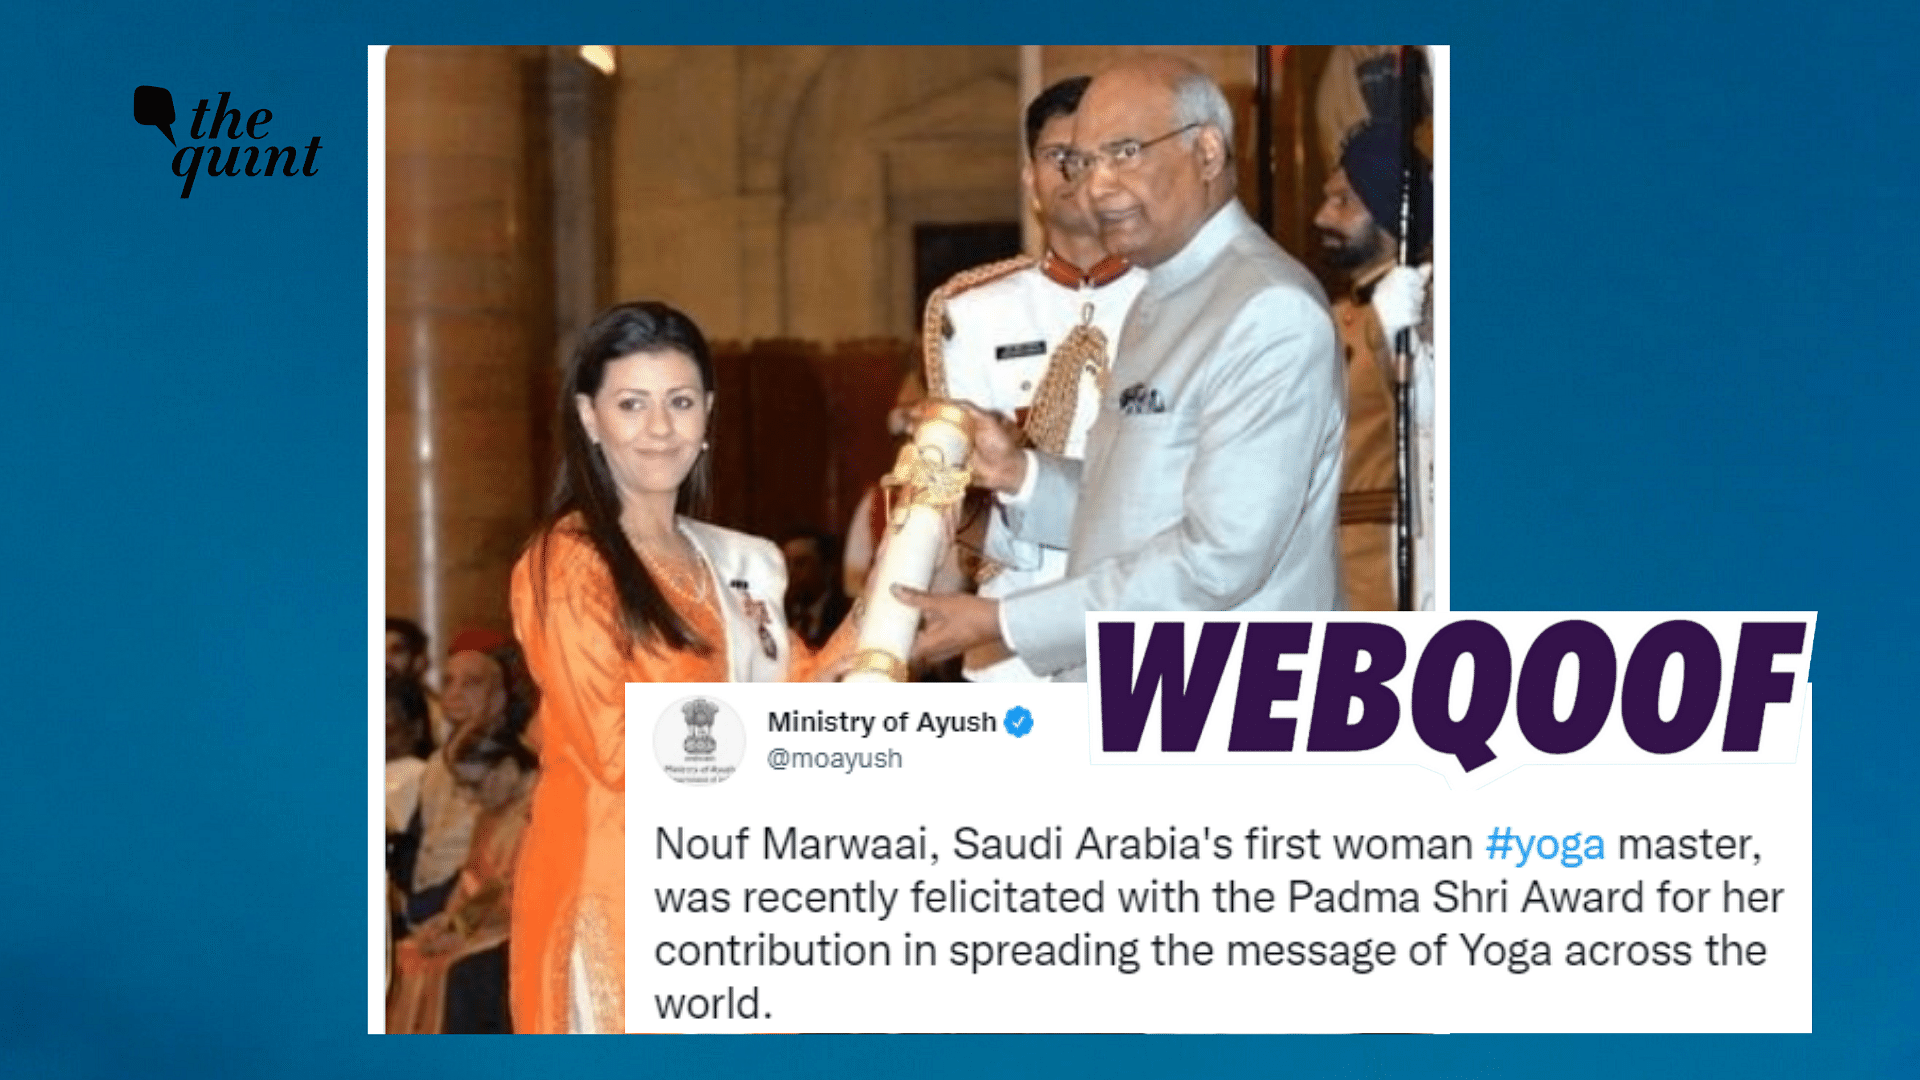 <div class="paragraphs"><p>The Ministry of Ayush's official Twitter handle posted an old photo and claimed that Nouf Marwaai recently received the Padma Shri Award.</p></div>